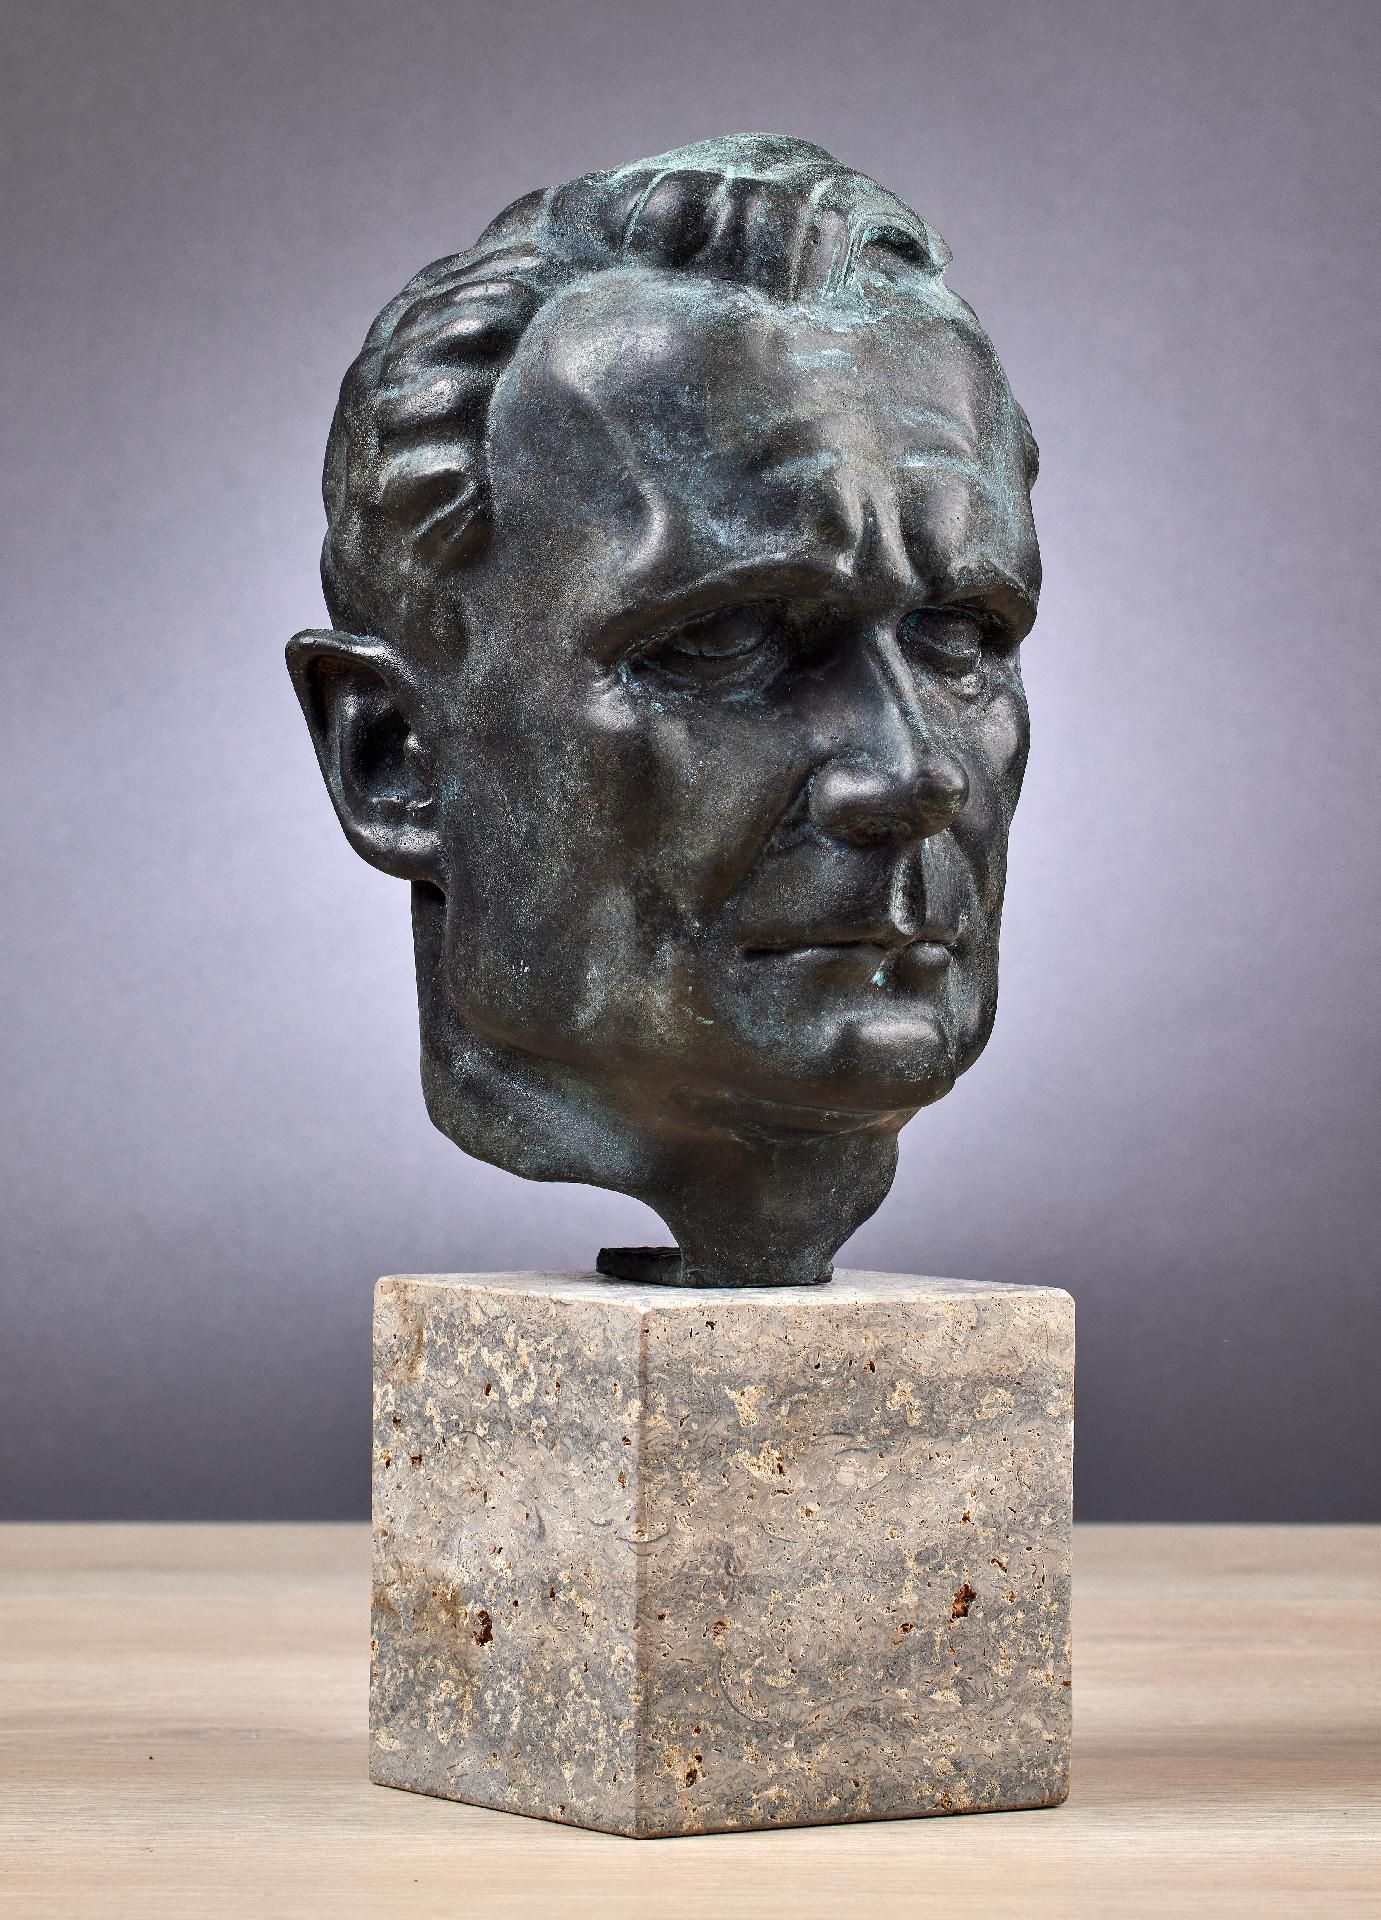 Art in The Third Reich 1933 - 1945 : H.J. Pagels: Portrait bust of Rudolf Hess. - Image 5 of 5